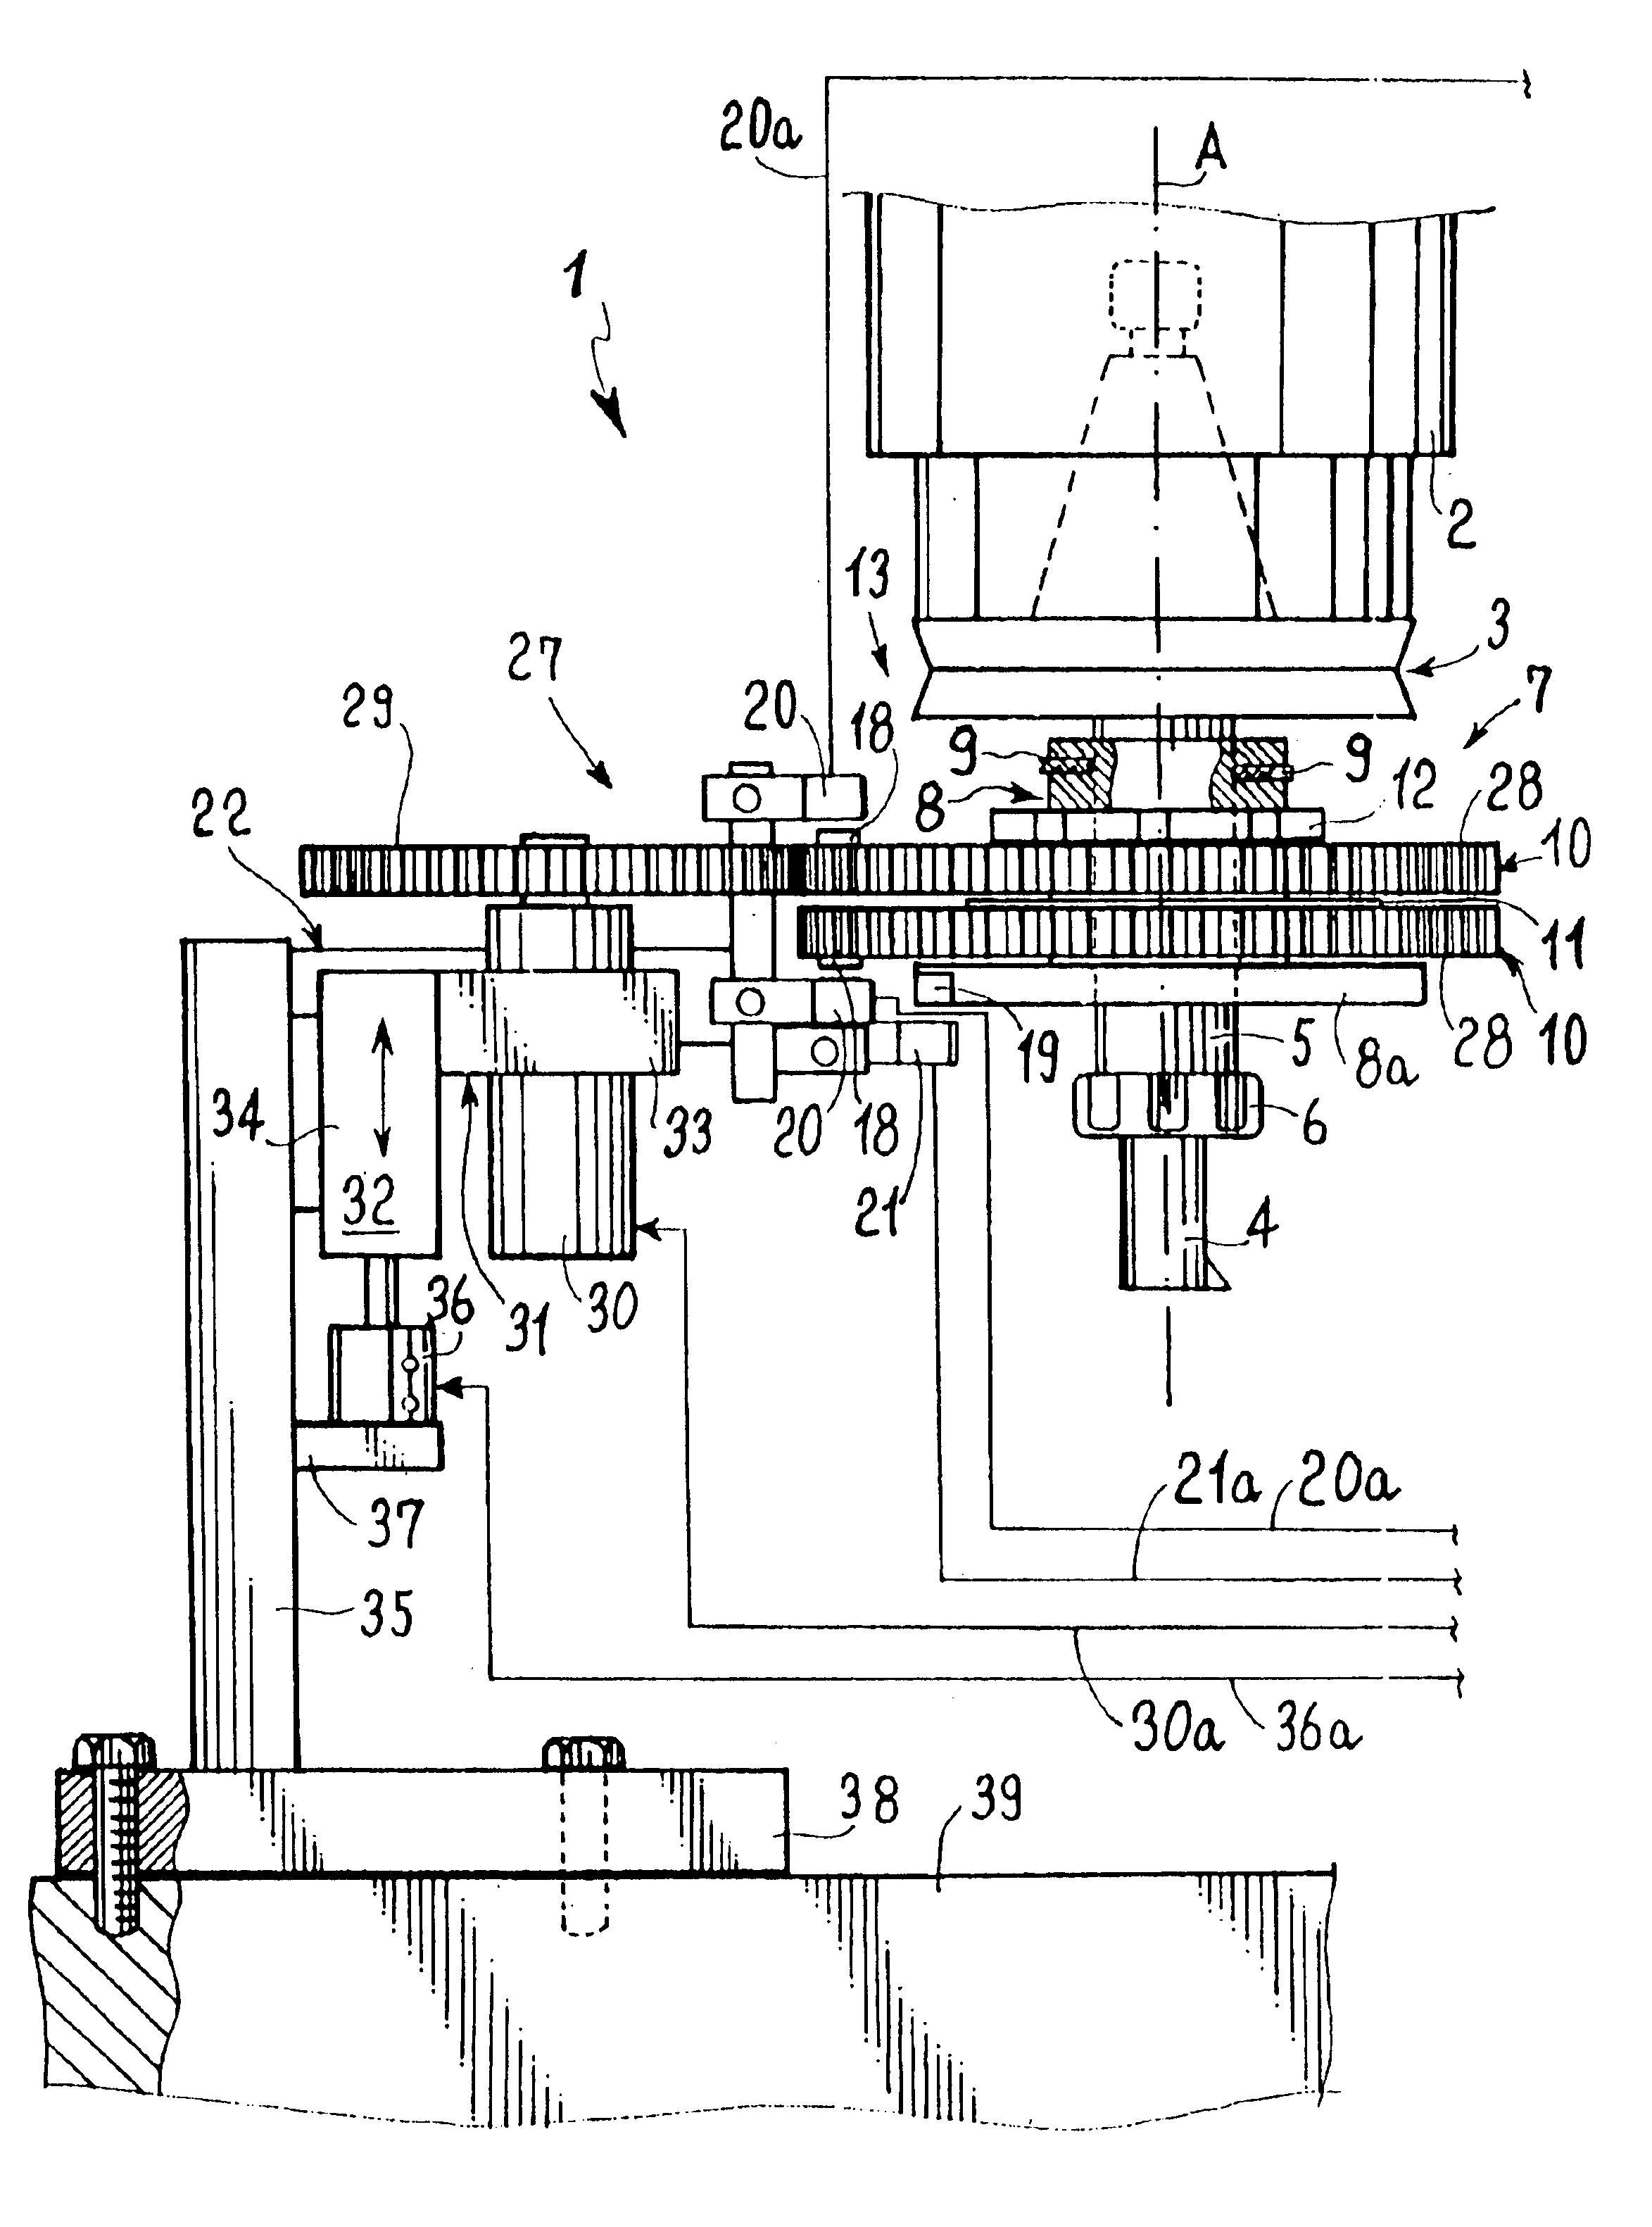 Balancing apparatus for rotating bodies, in particular tool-carriers with tools rotating at high speed